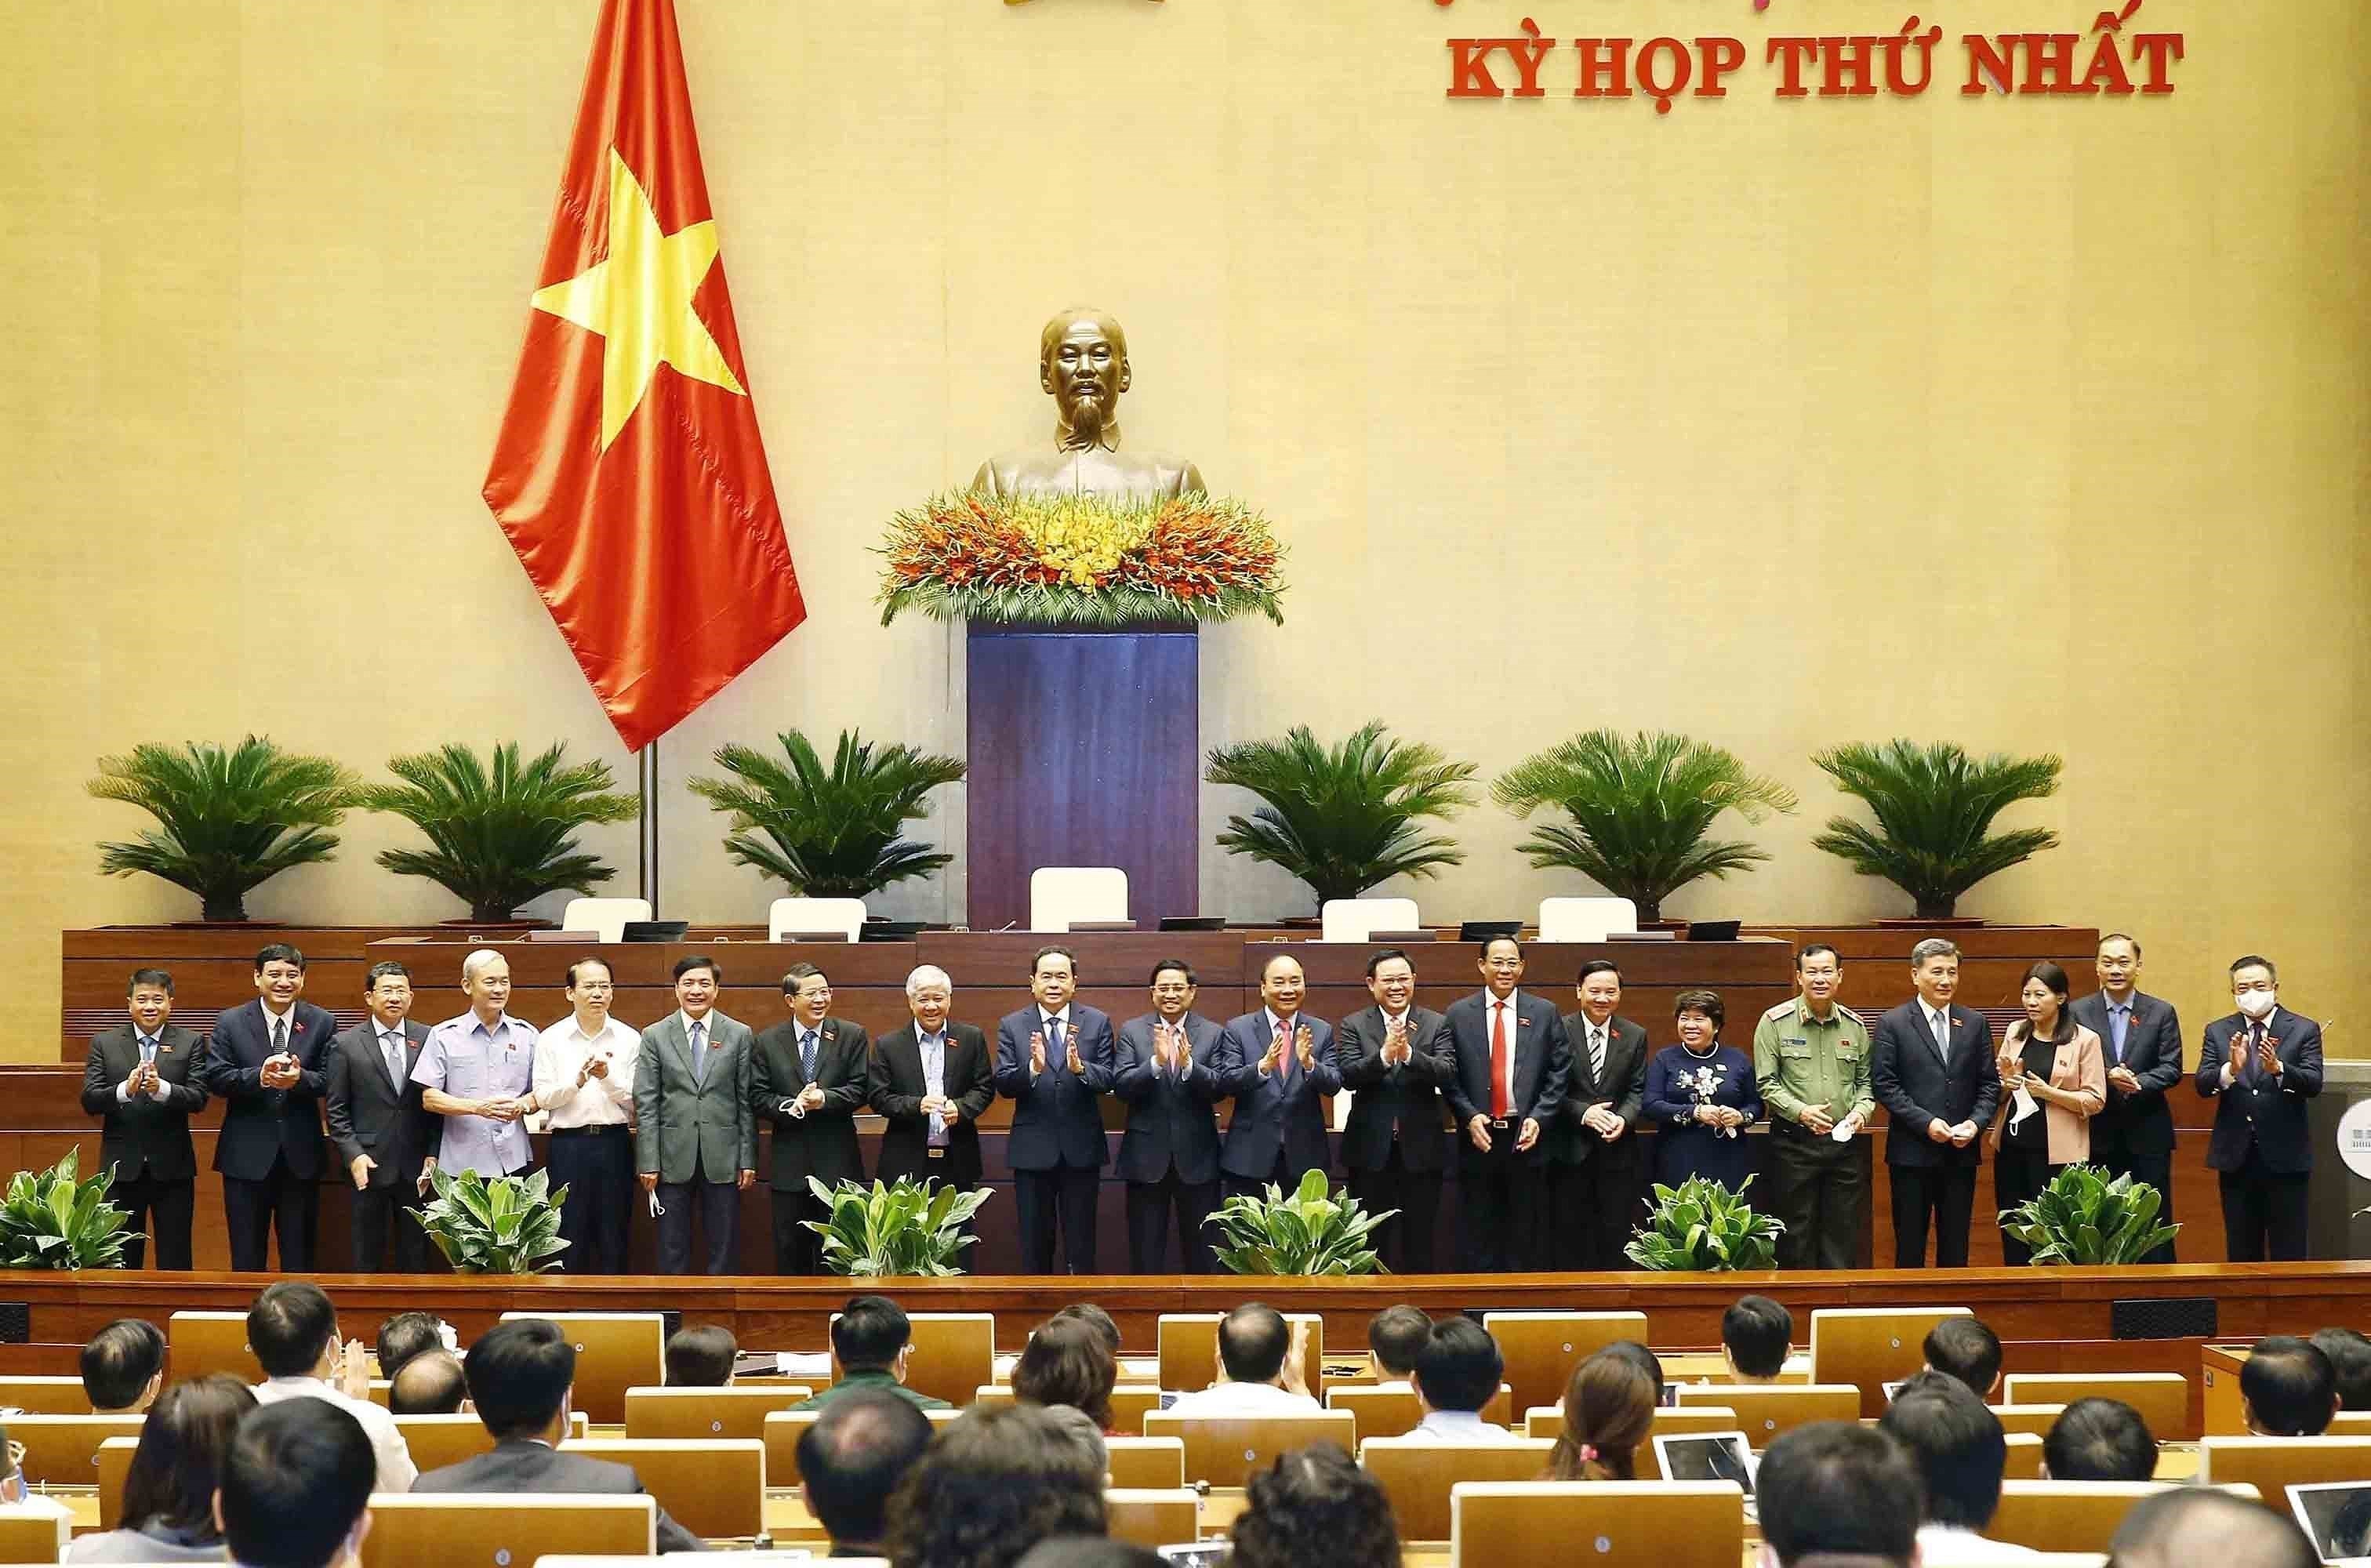 Several important positions in 15th National Assembly elected hinh anh 5